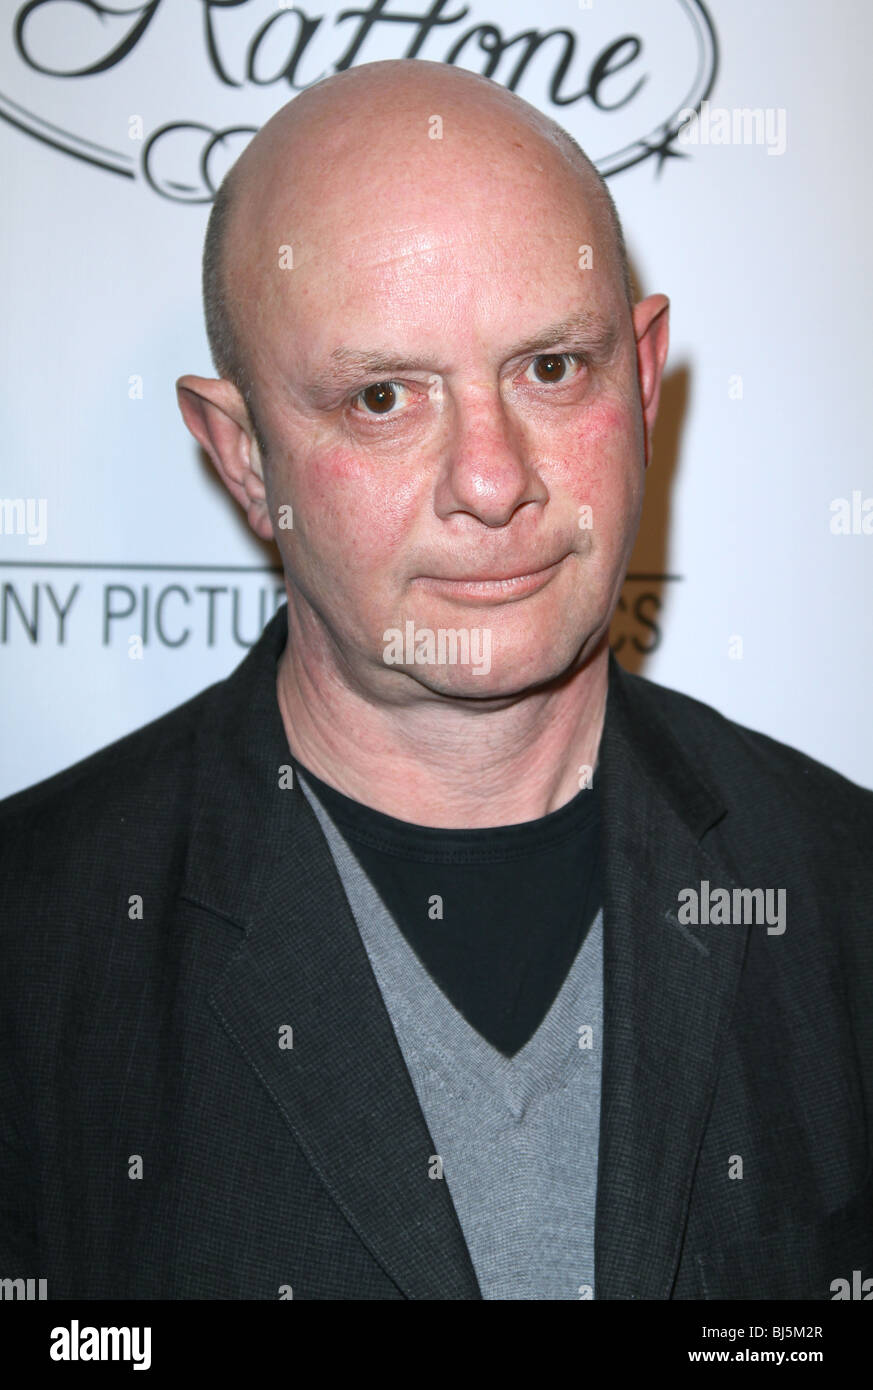 NICK HORNBY SONY PICTURES CLASSIC fête des Oscars 2010 IL CIELO LOS ANGELES CALIFORNIA USA 06 Mars 2010 Banque D'Images